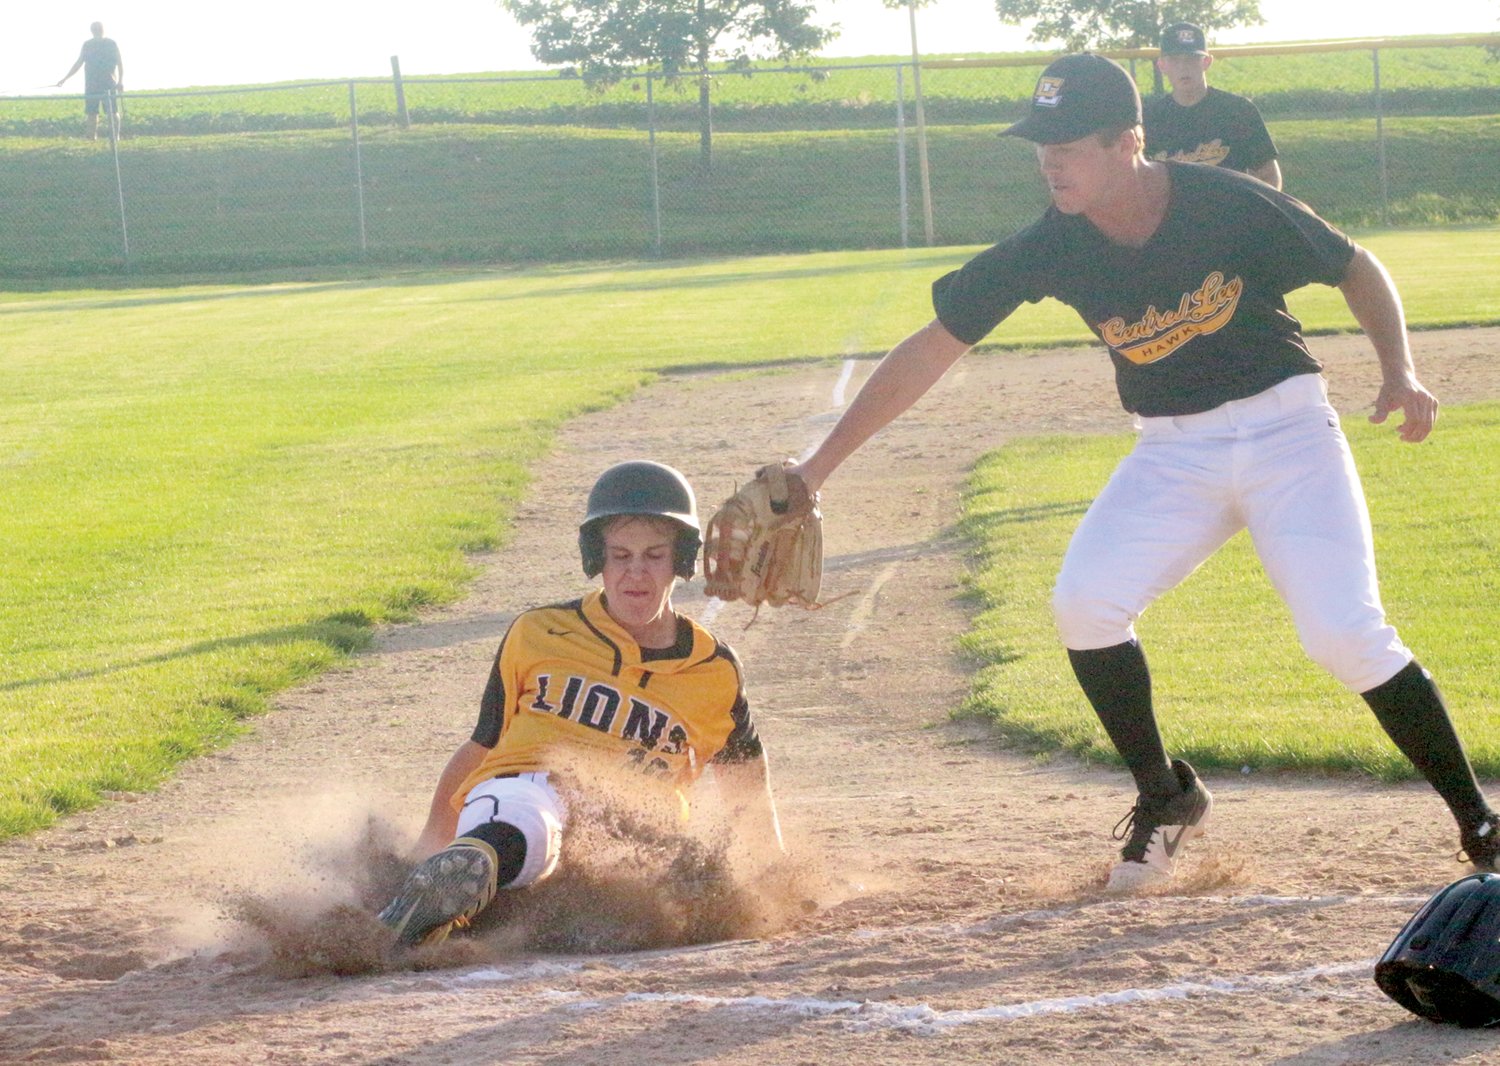 Lone Tree’s Cade Shield slides safely into home plate during their June 24 game against Louisa-Muscatine.